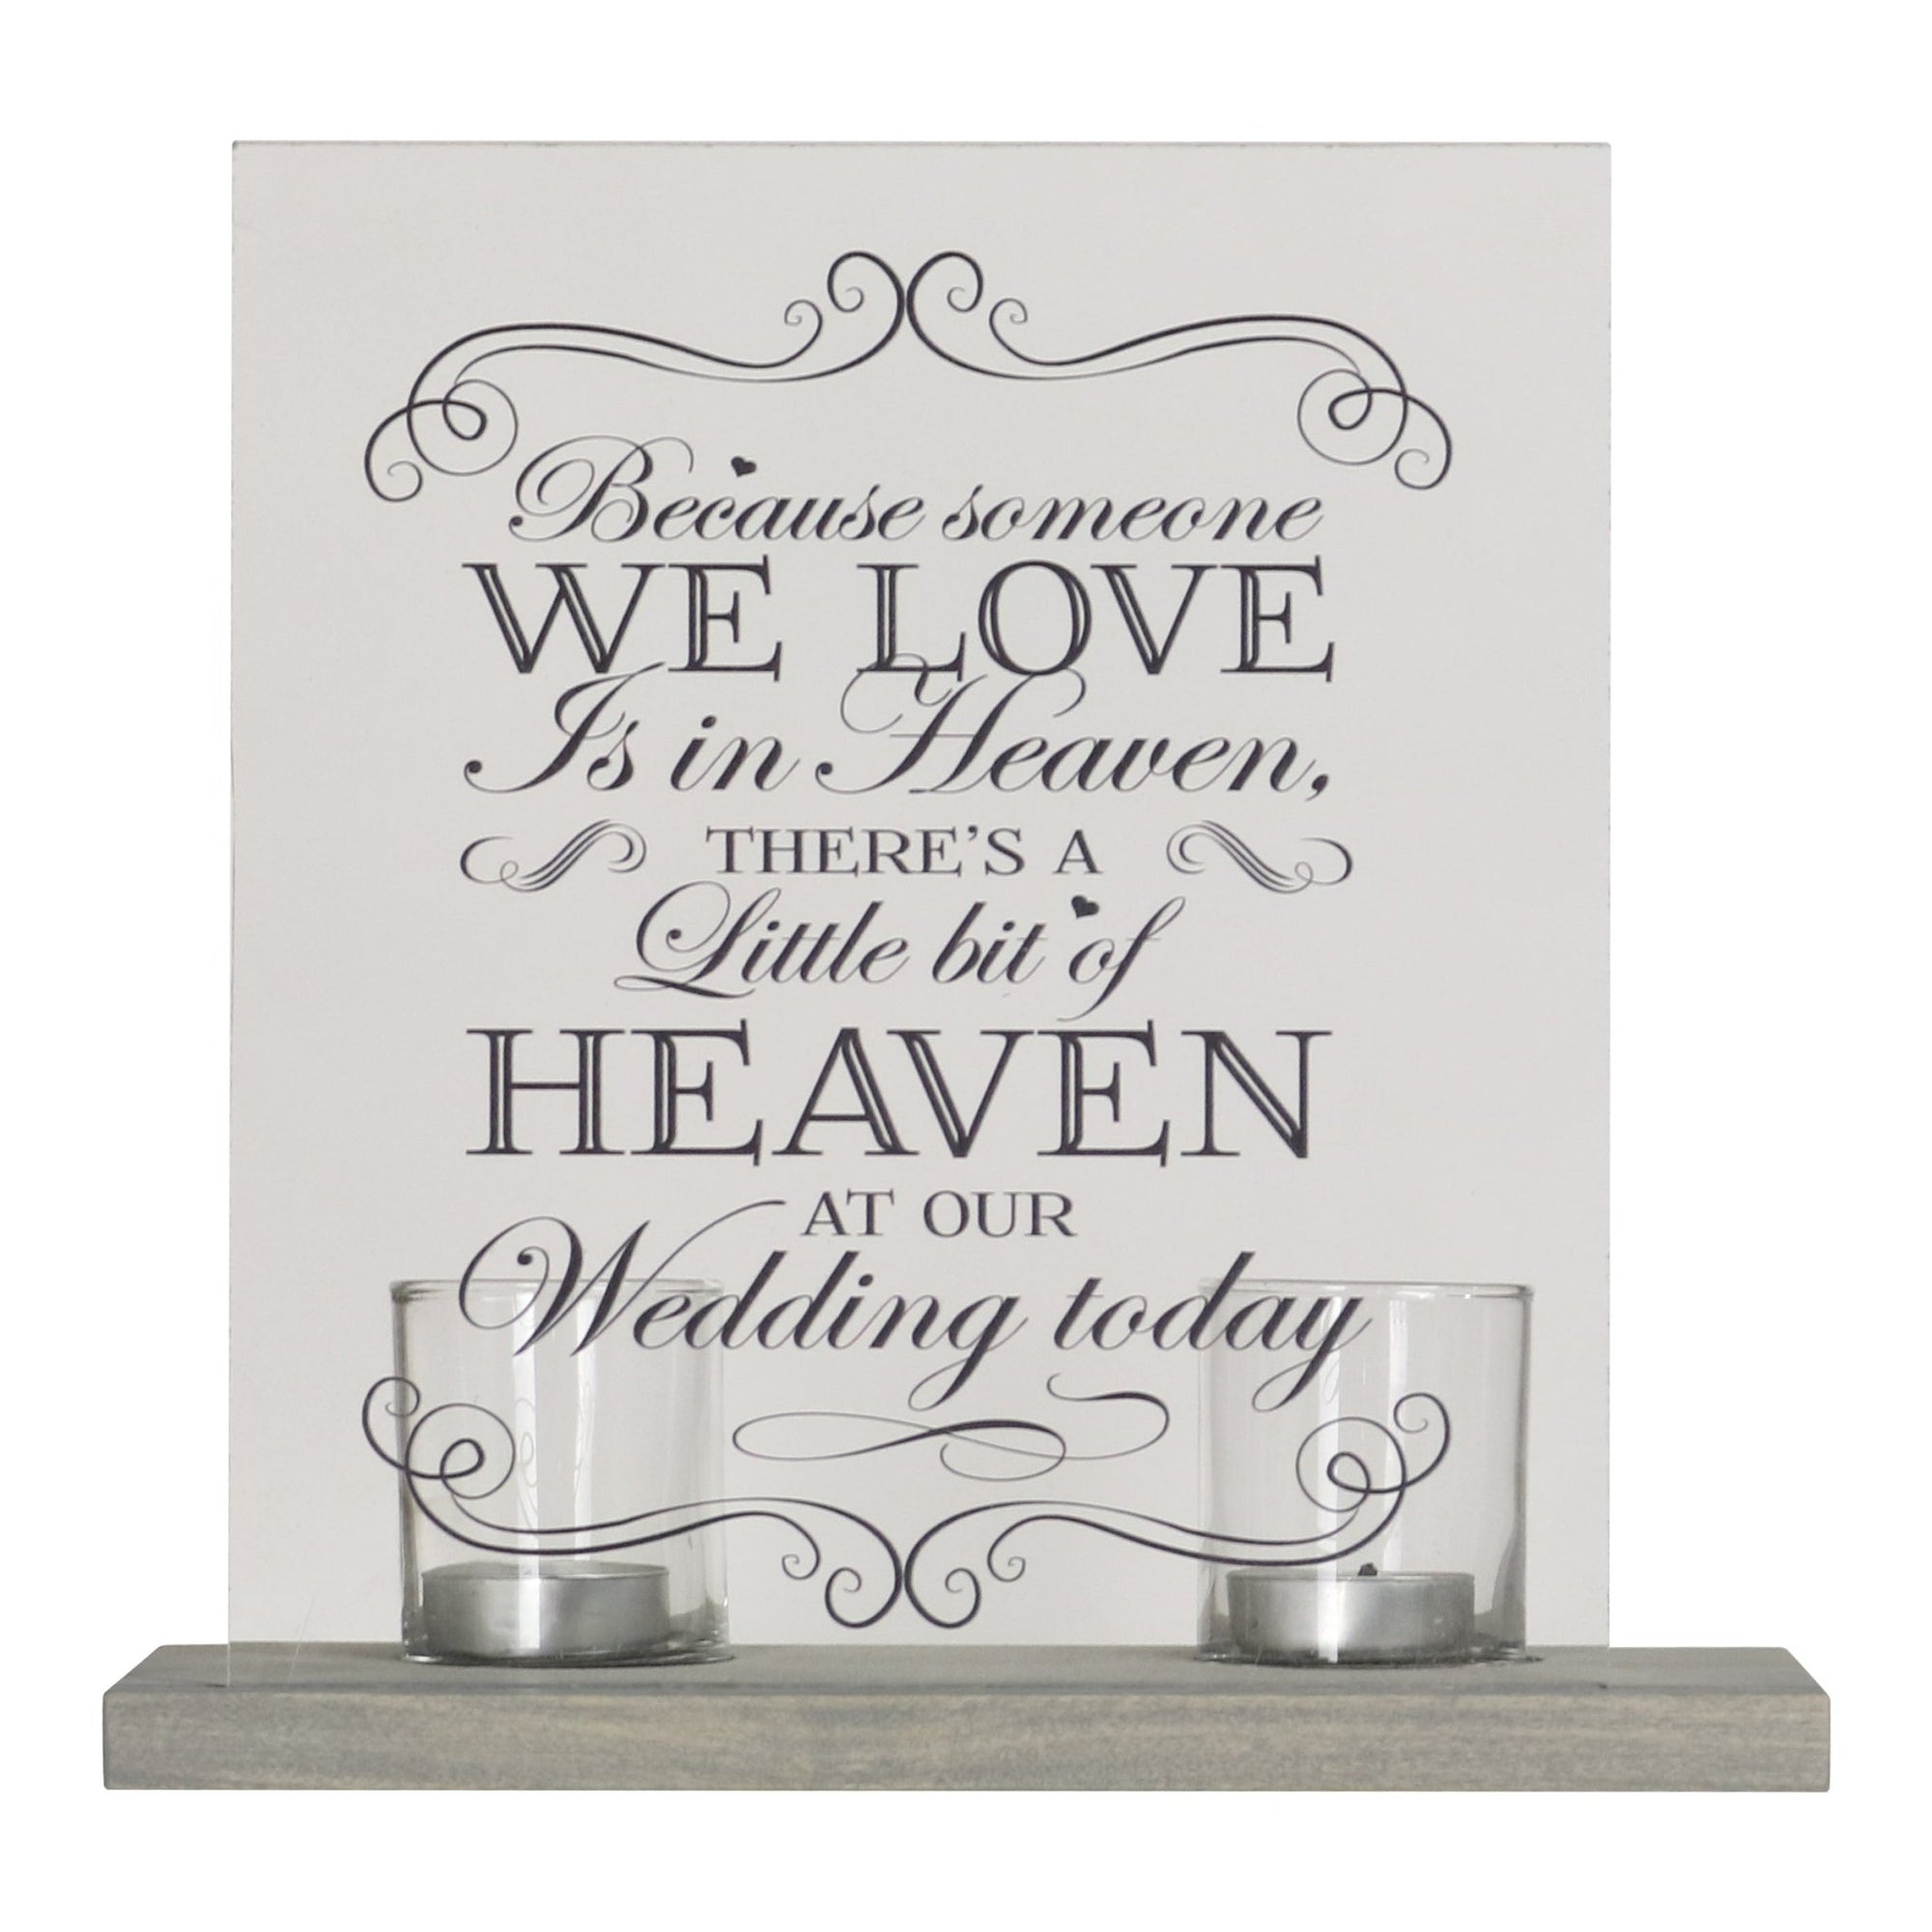 Memorial Acrylic Sign 8x10 with Votive Candle Holder Little Bit of Heaven - LifeSong Milestones